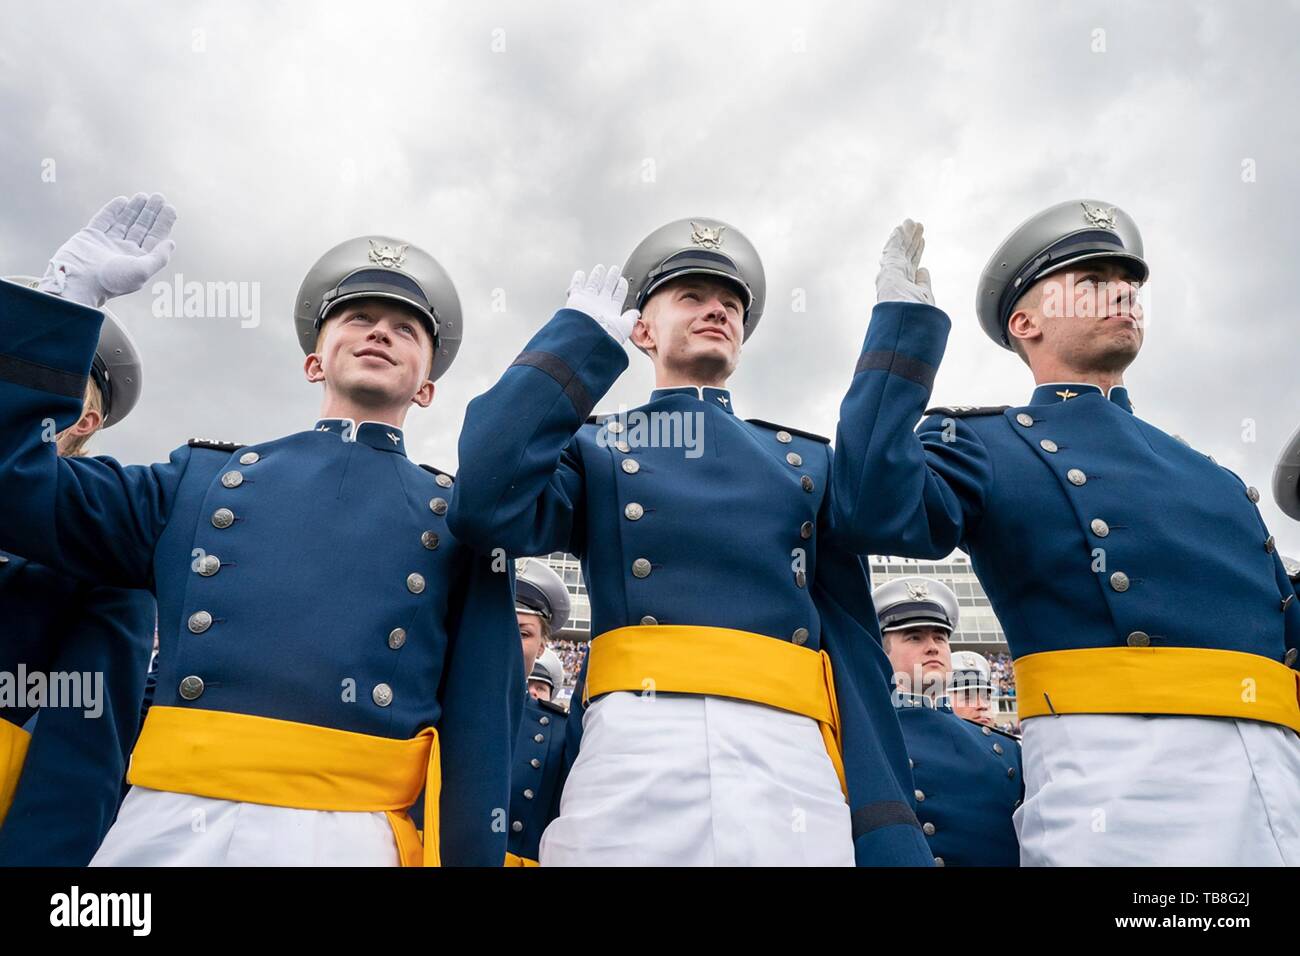 U.S. Air Force Academy cadets take the oath at the conclusion of graduation ceremonies at the USAF Academy Falcon Stadium May 30, 2019 in Colorado Springs, Colorado. U.S. President Donald Trump gave the commencement address to the more than 900 graduates. Credit: Planetpix/Alamy Live News Stock Photo